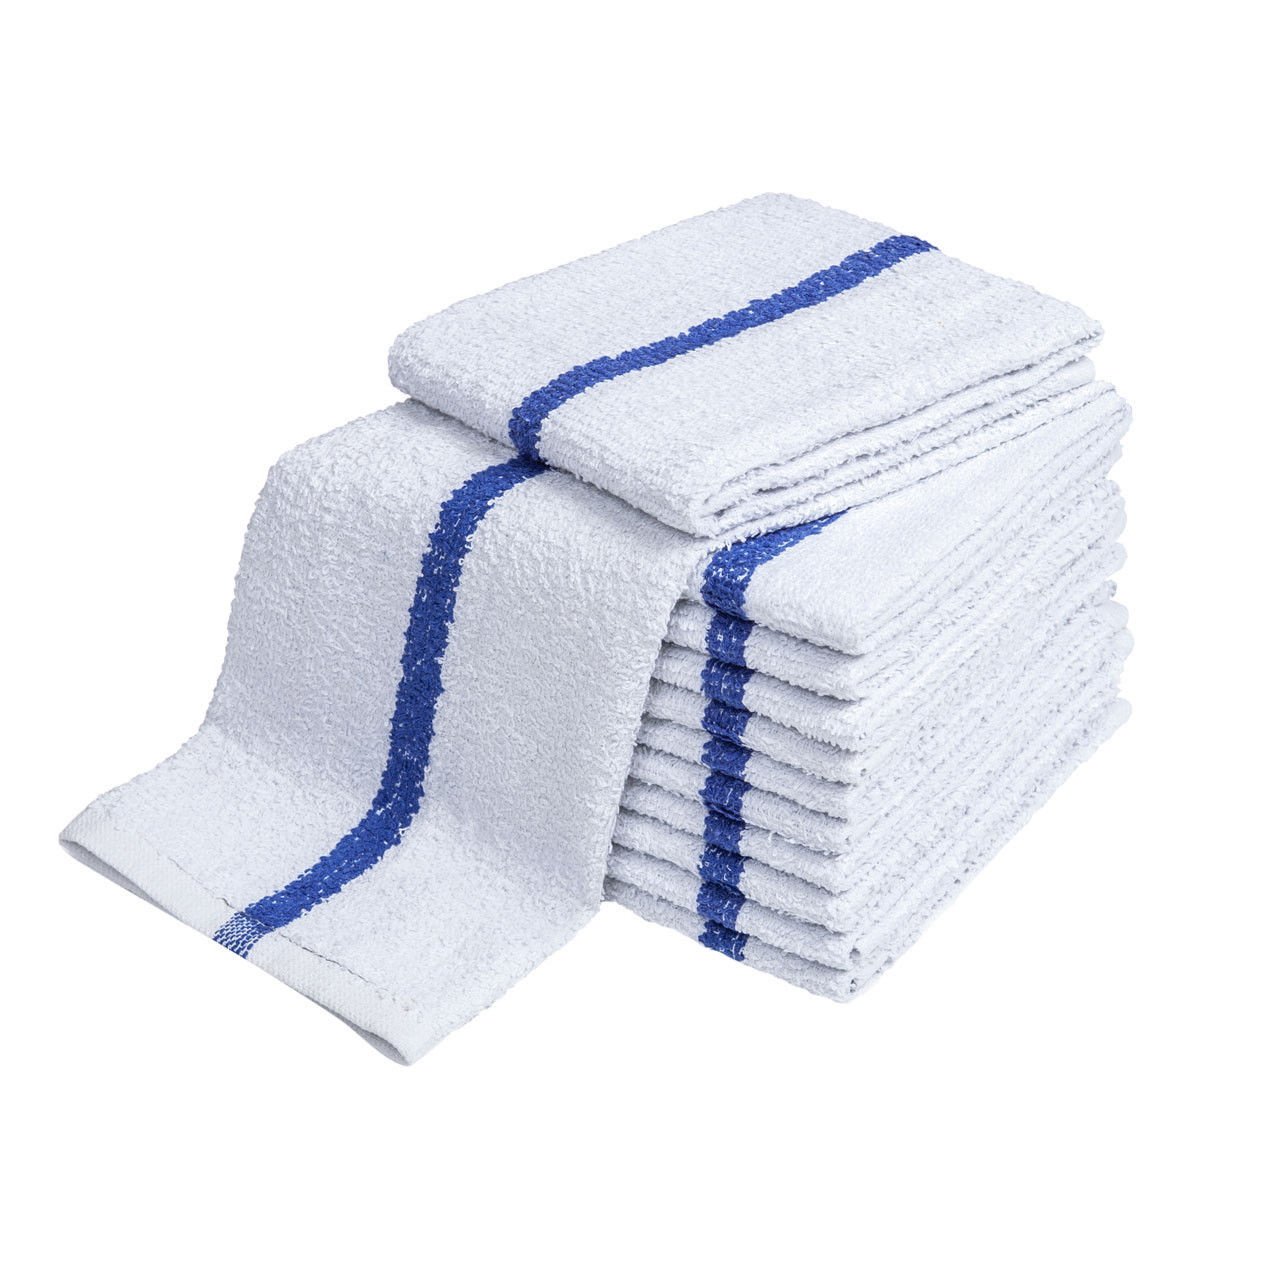 What are the features of the ADI Full Terry, Center Stripe bar towels?